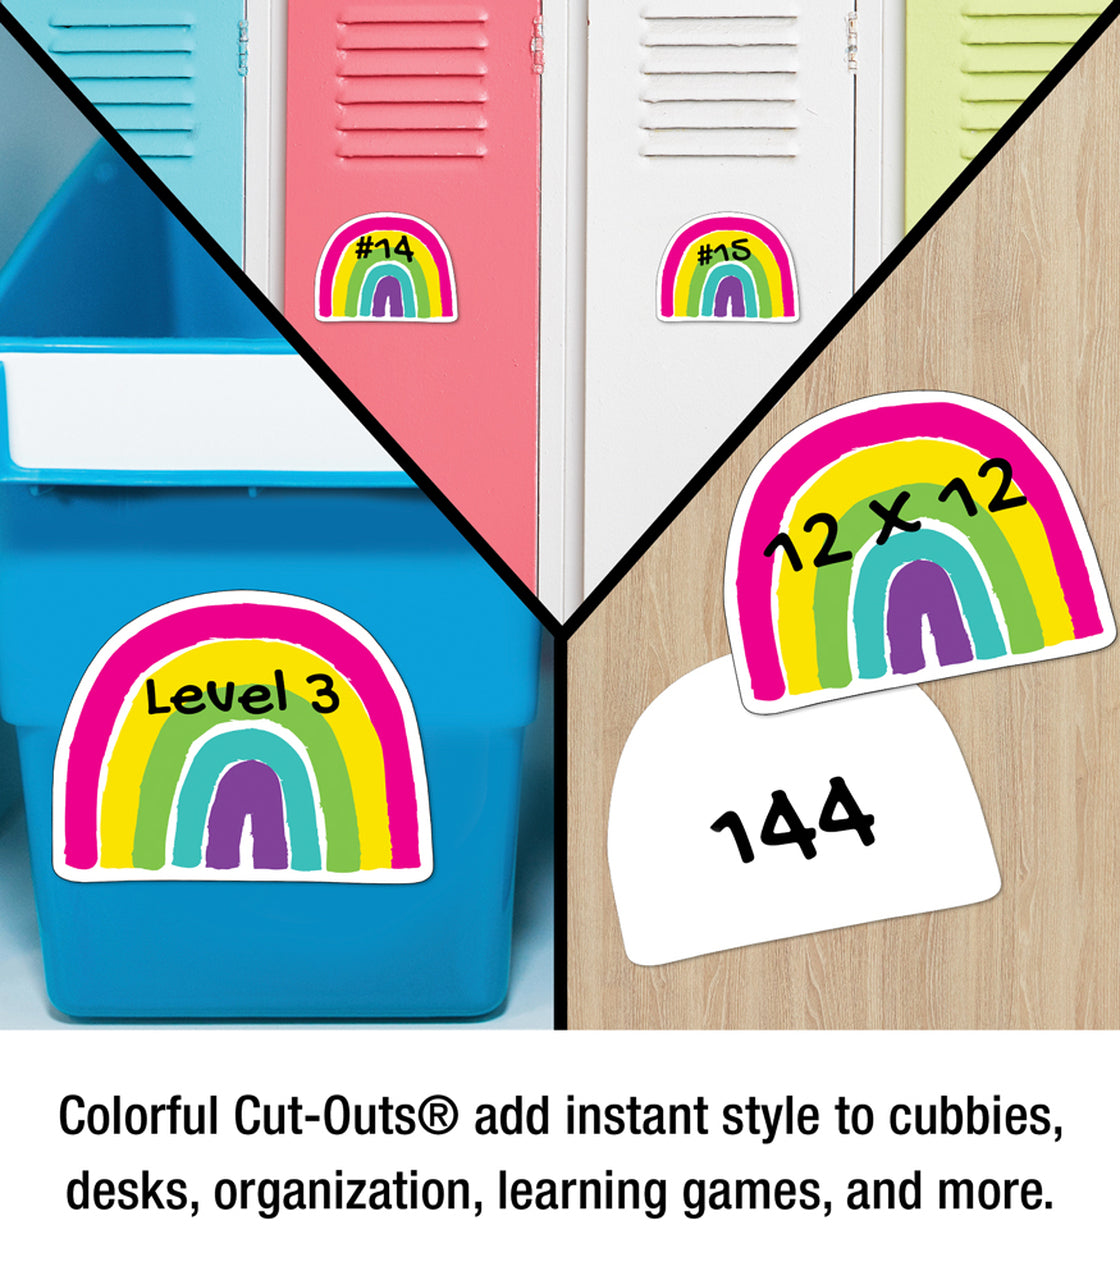 Rainbow Cut-Outs